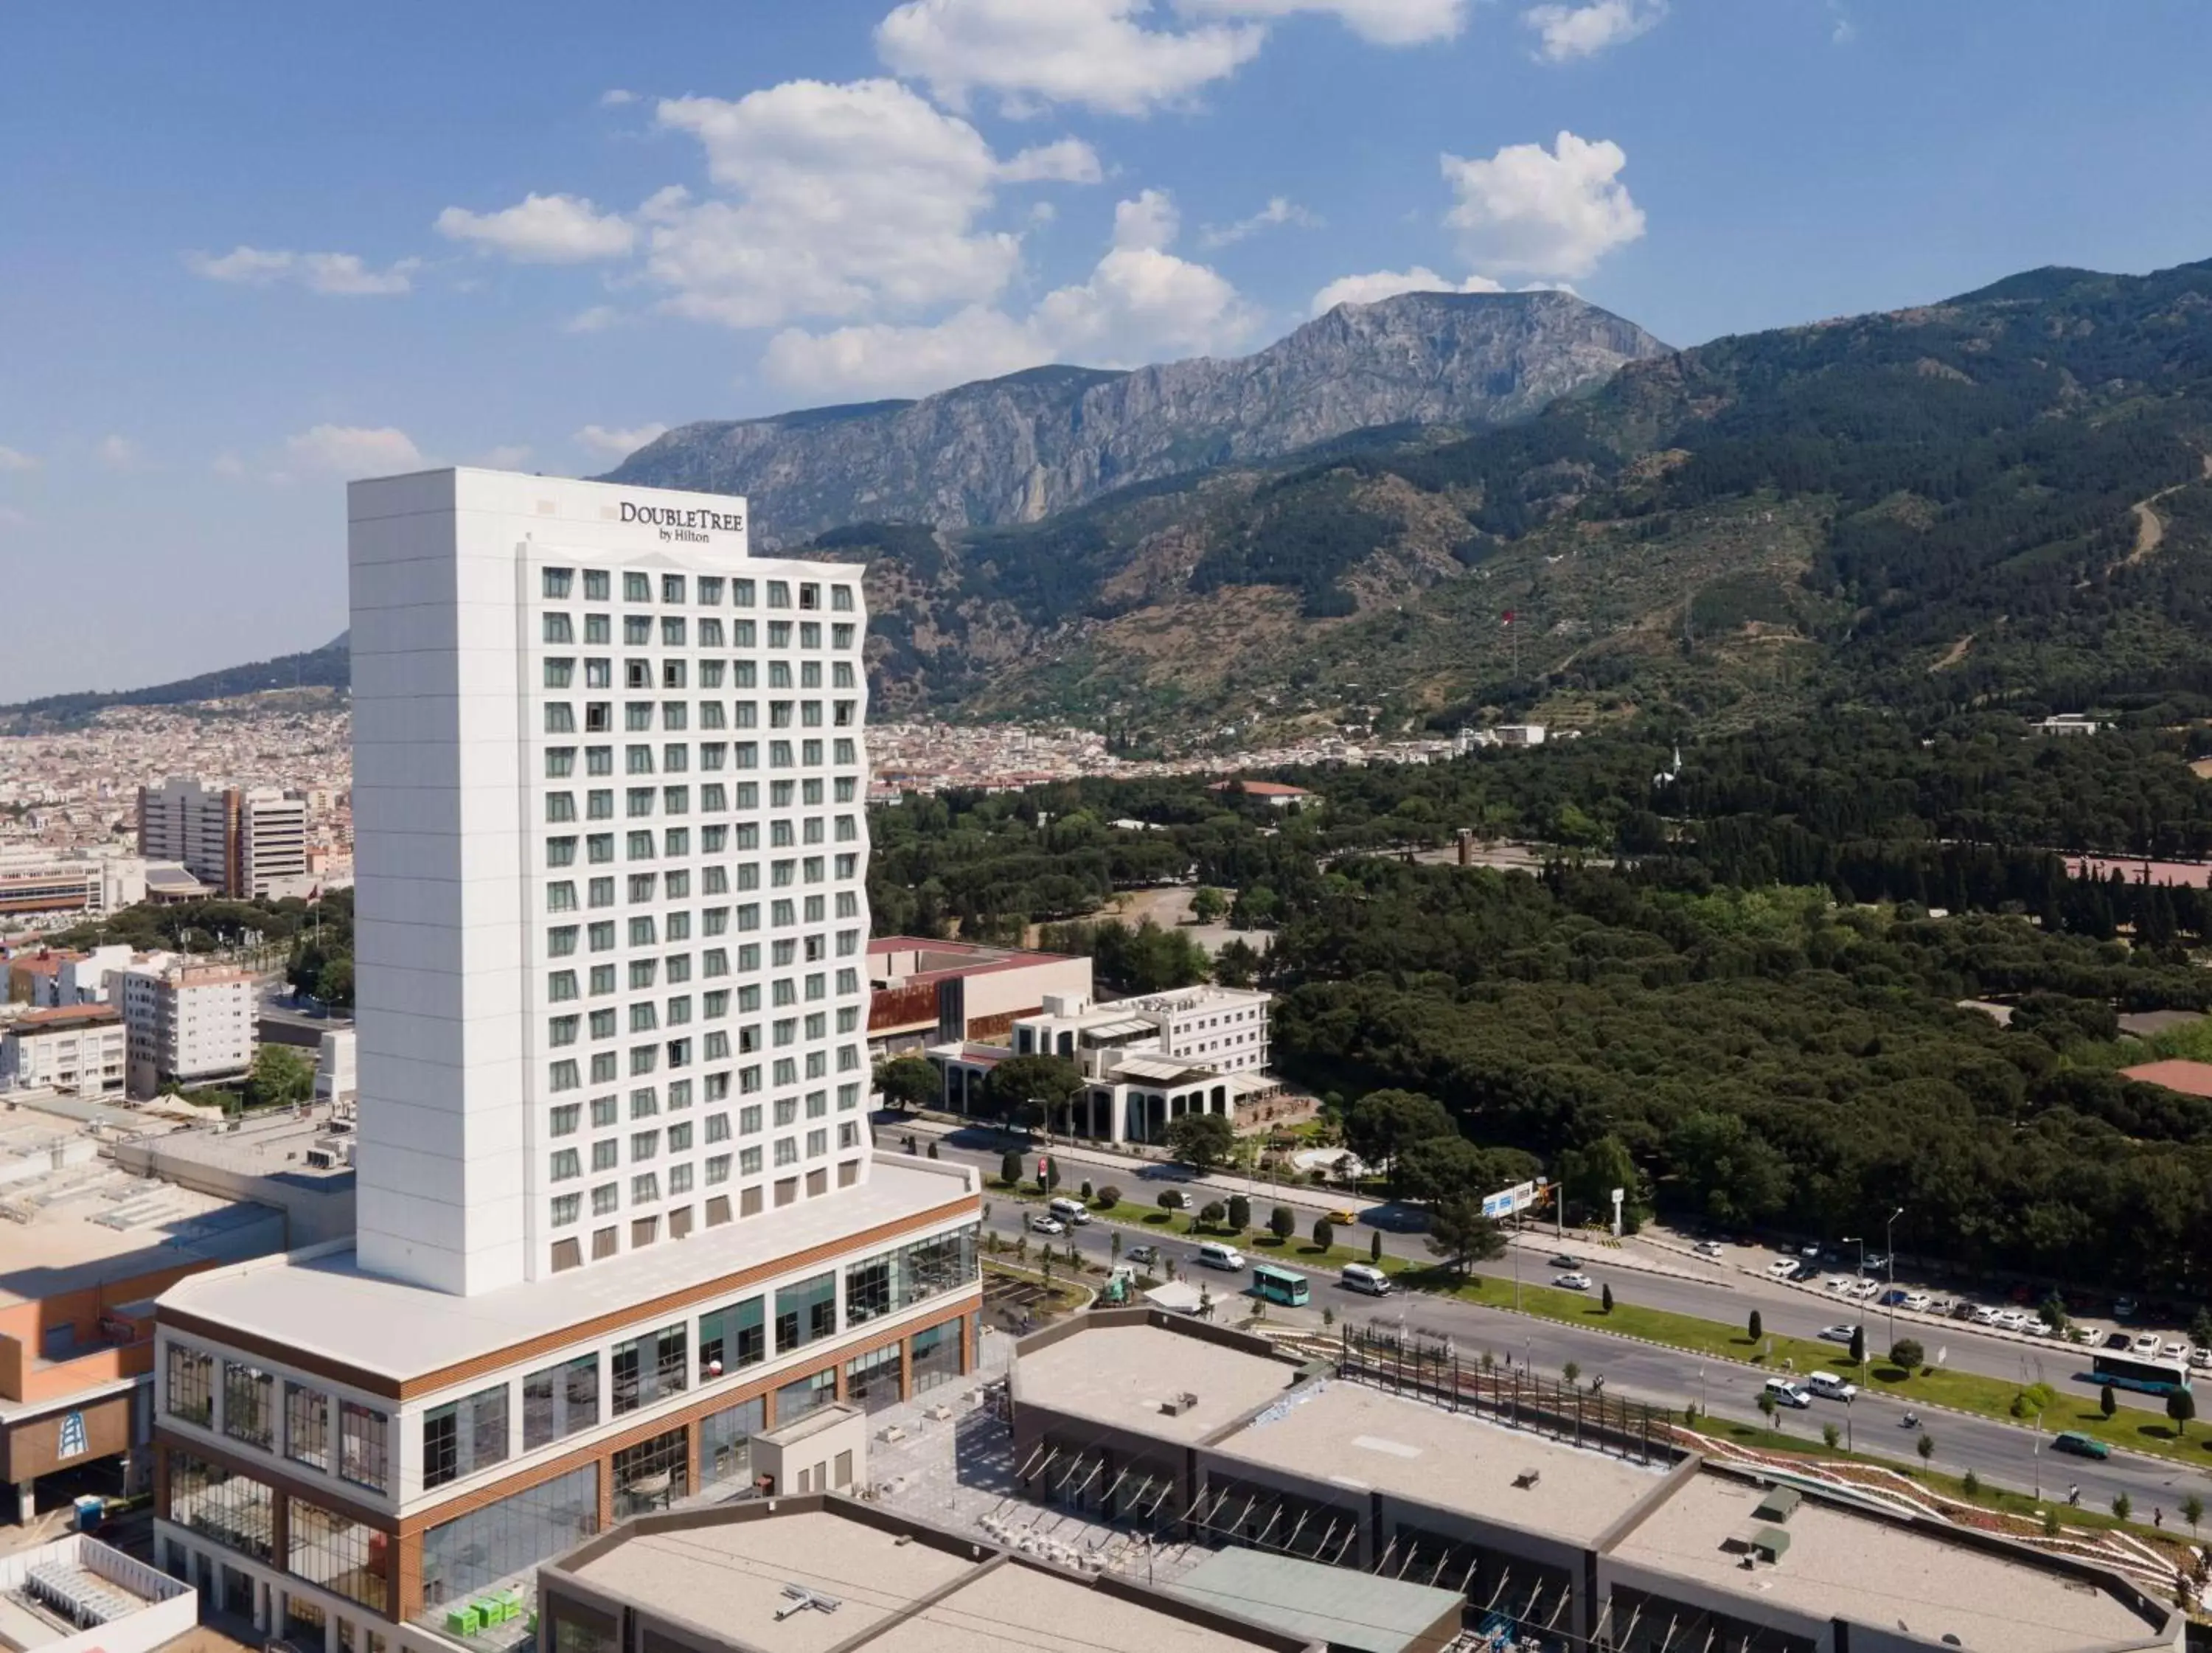 Property building, Bird's-eye View in DoubleTree by Hilton Manisa